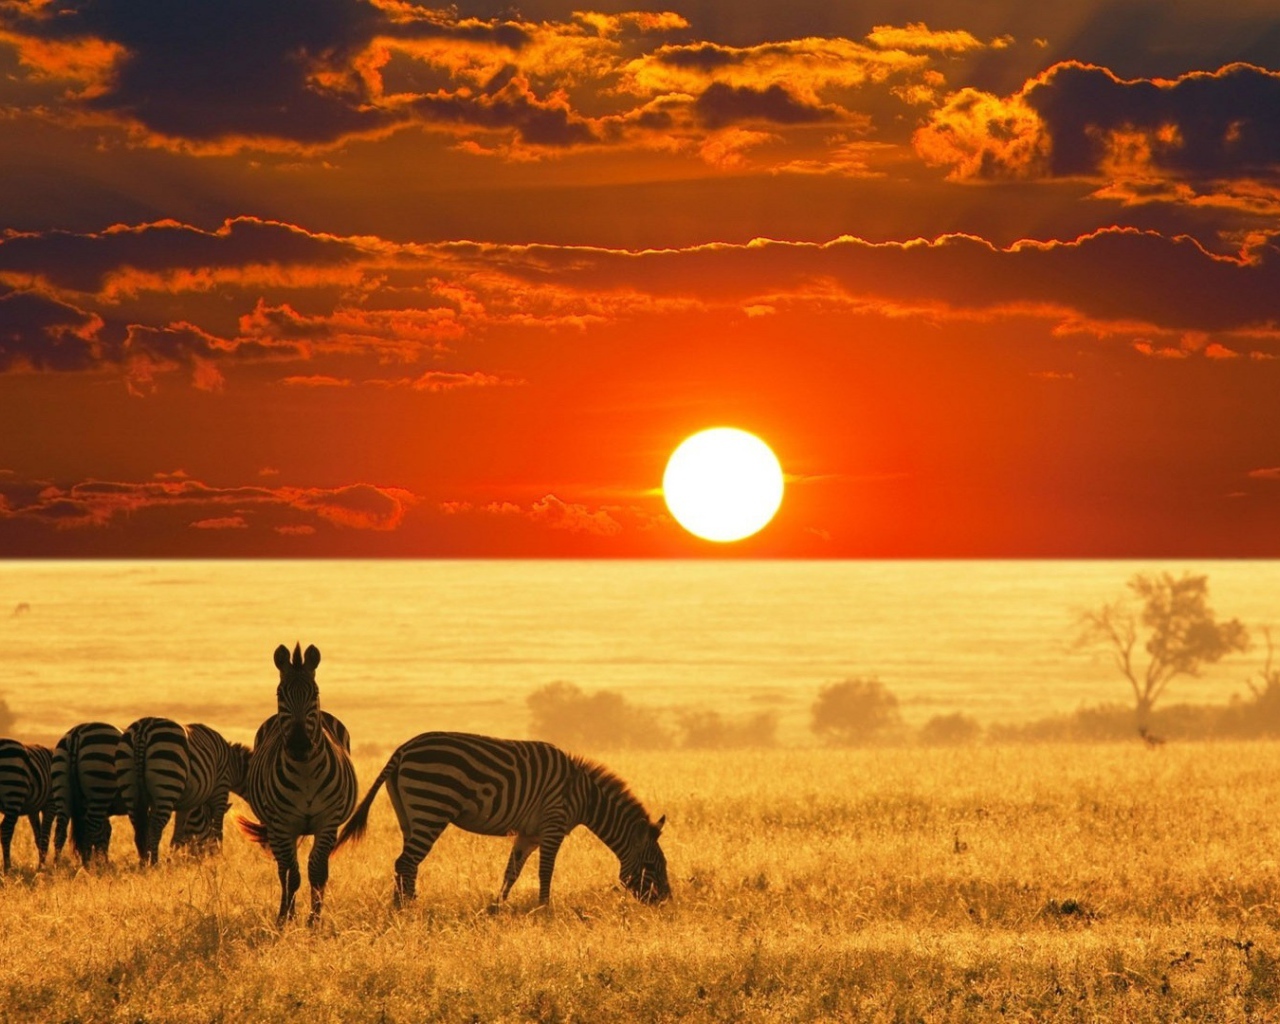 Zebras in a field at sunset, Africa